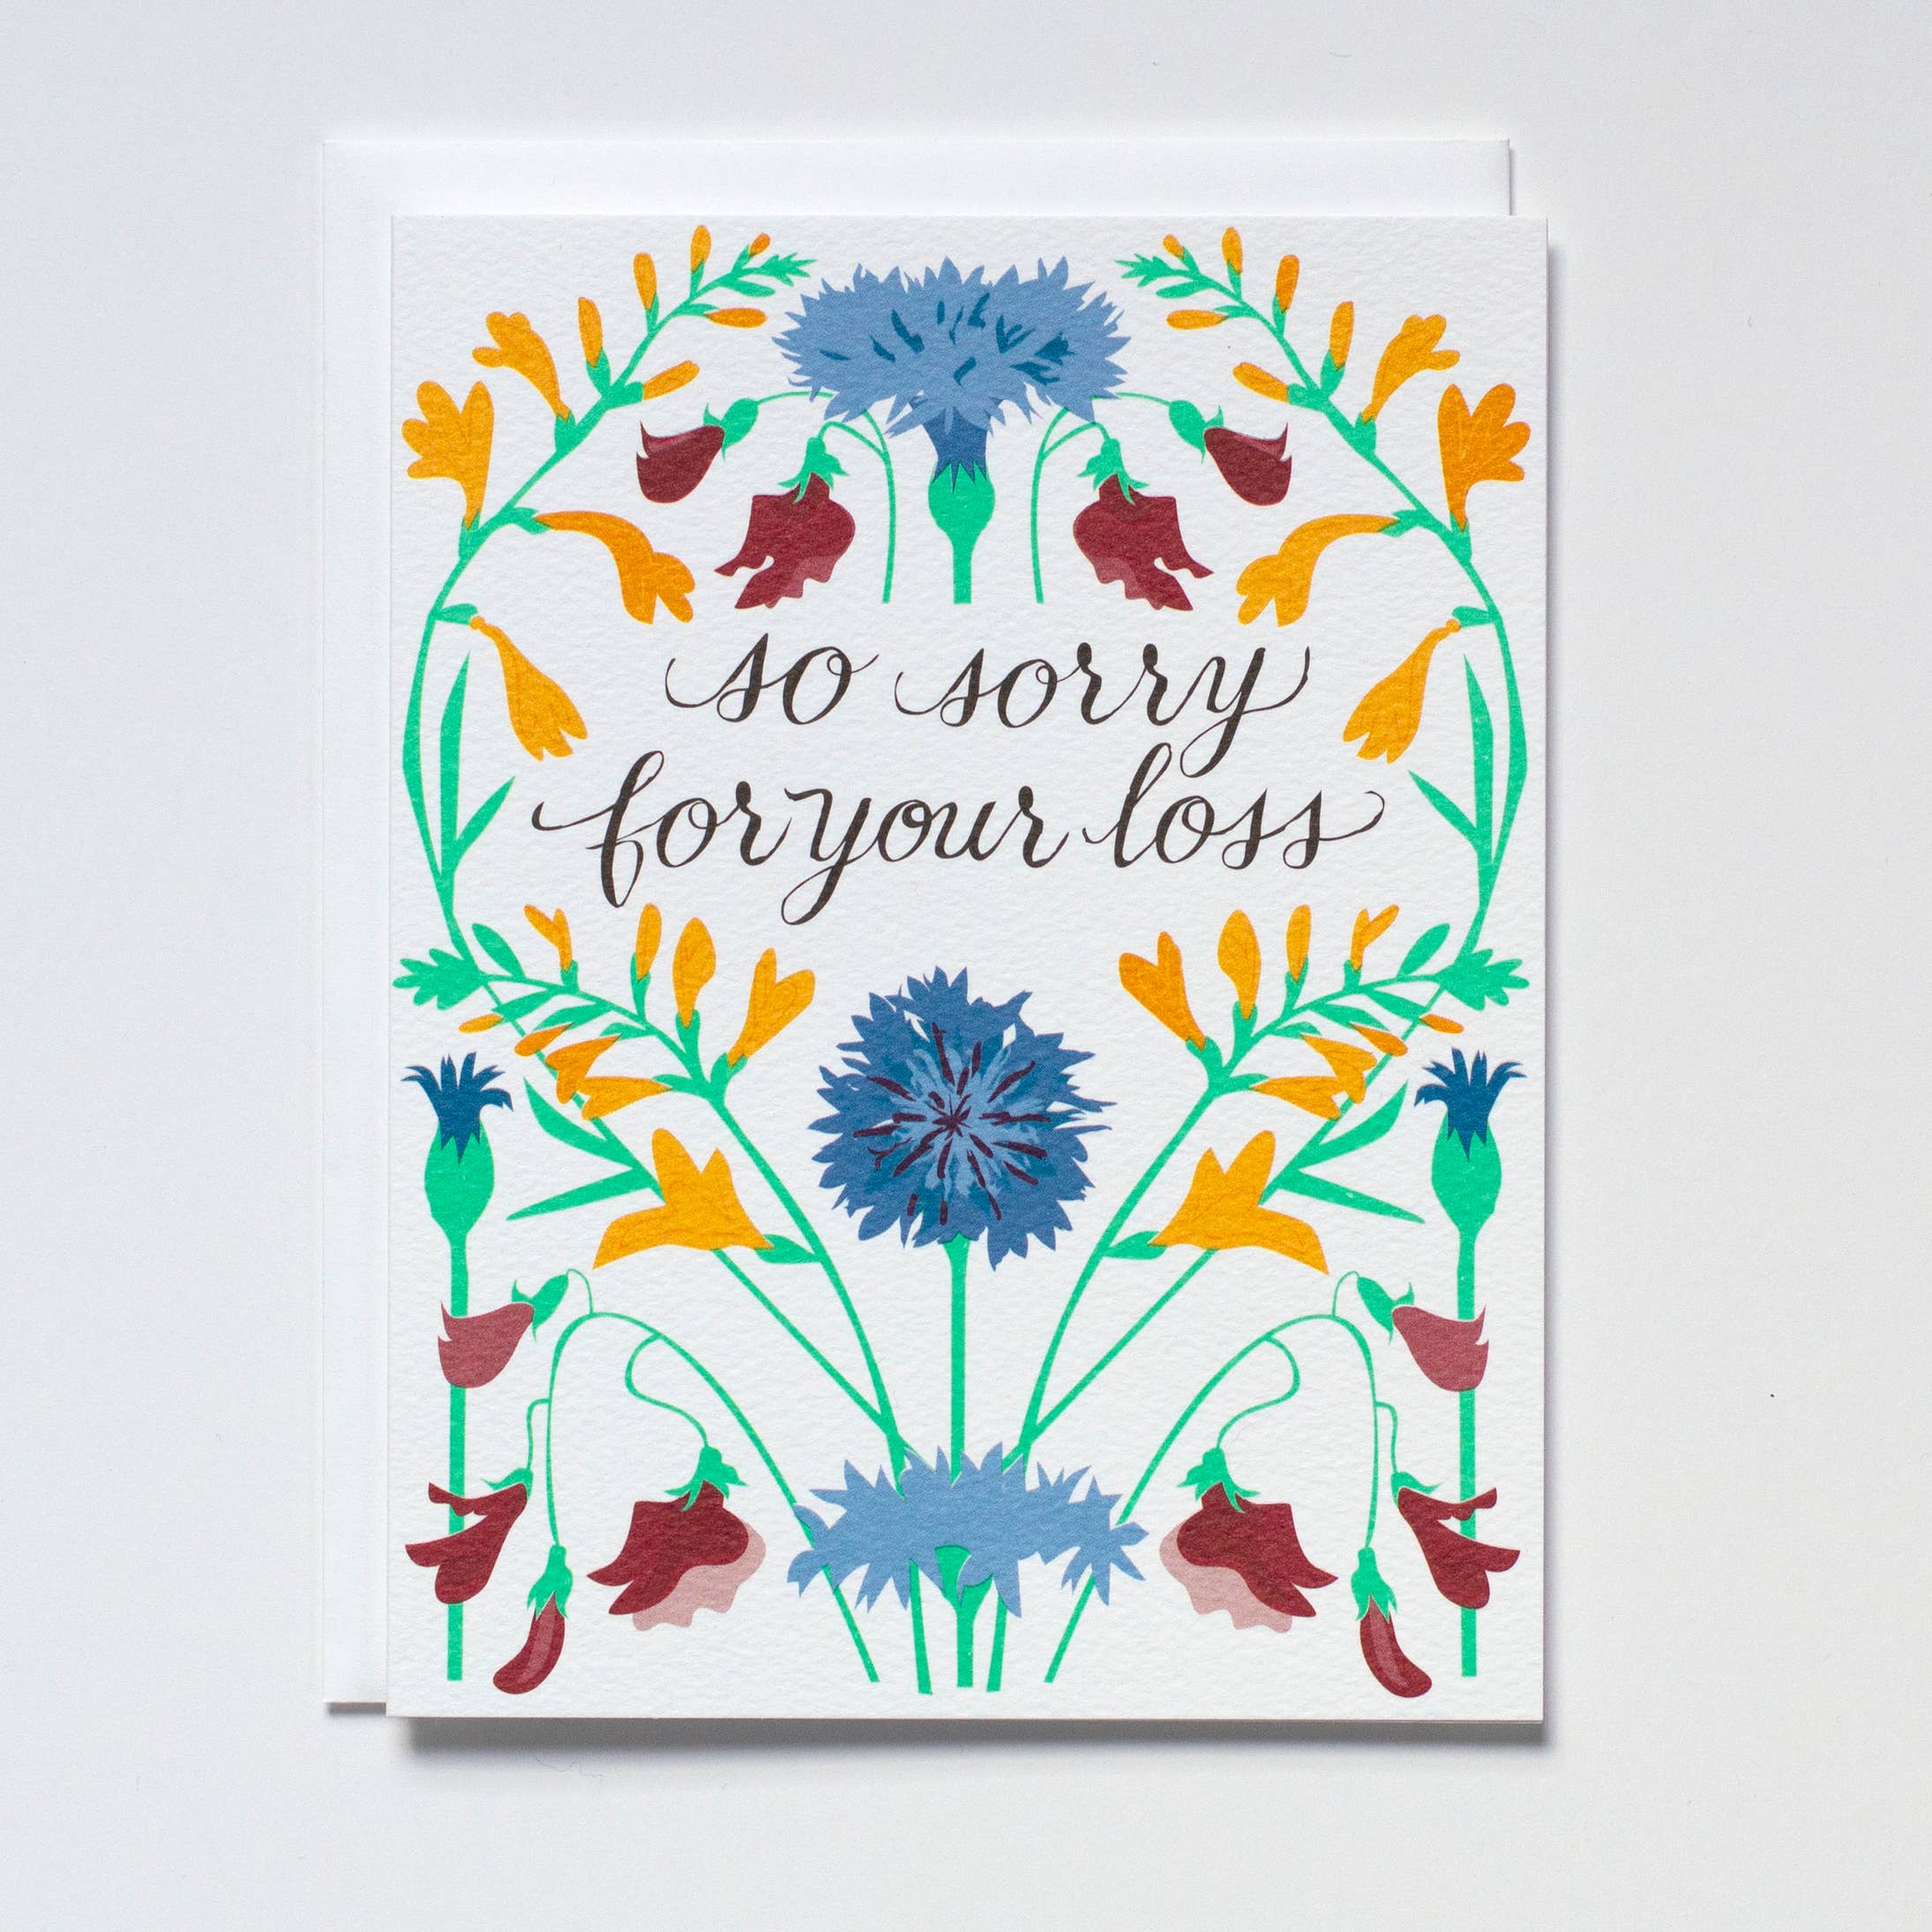 Banquet Workshop "So Sorry For Your Loss" Card